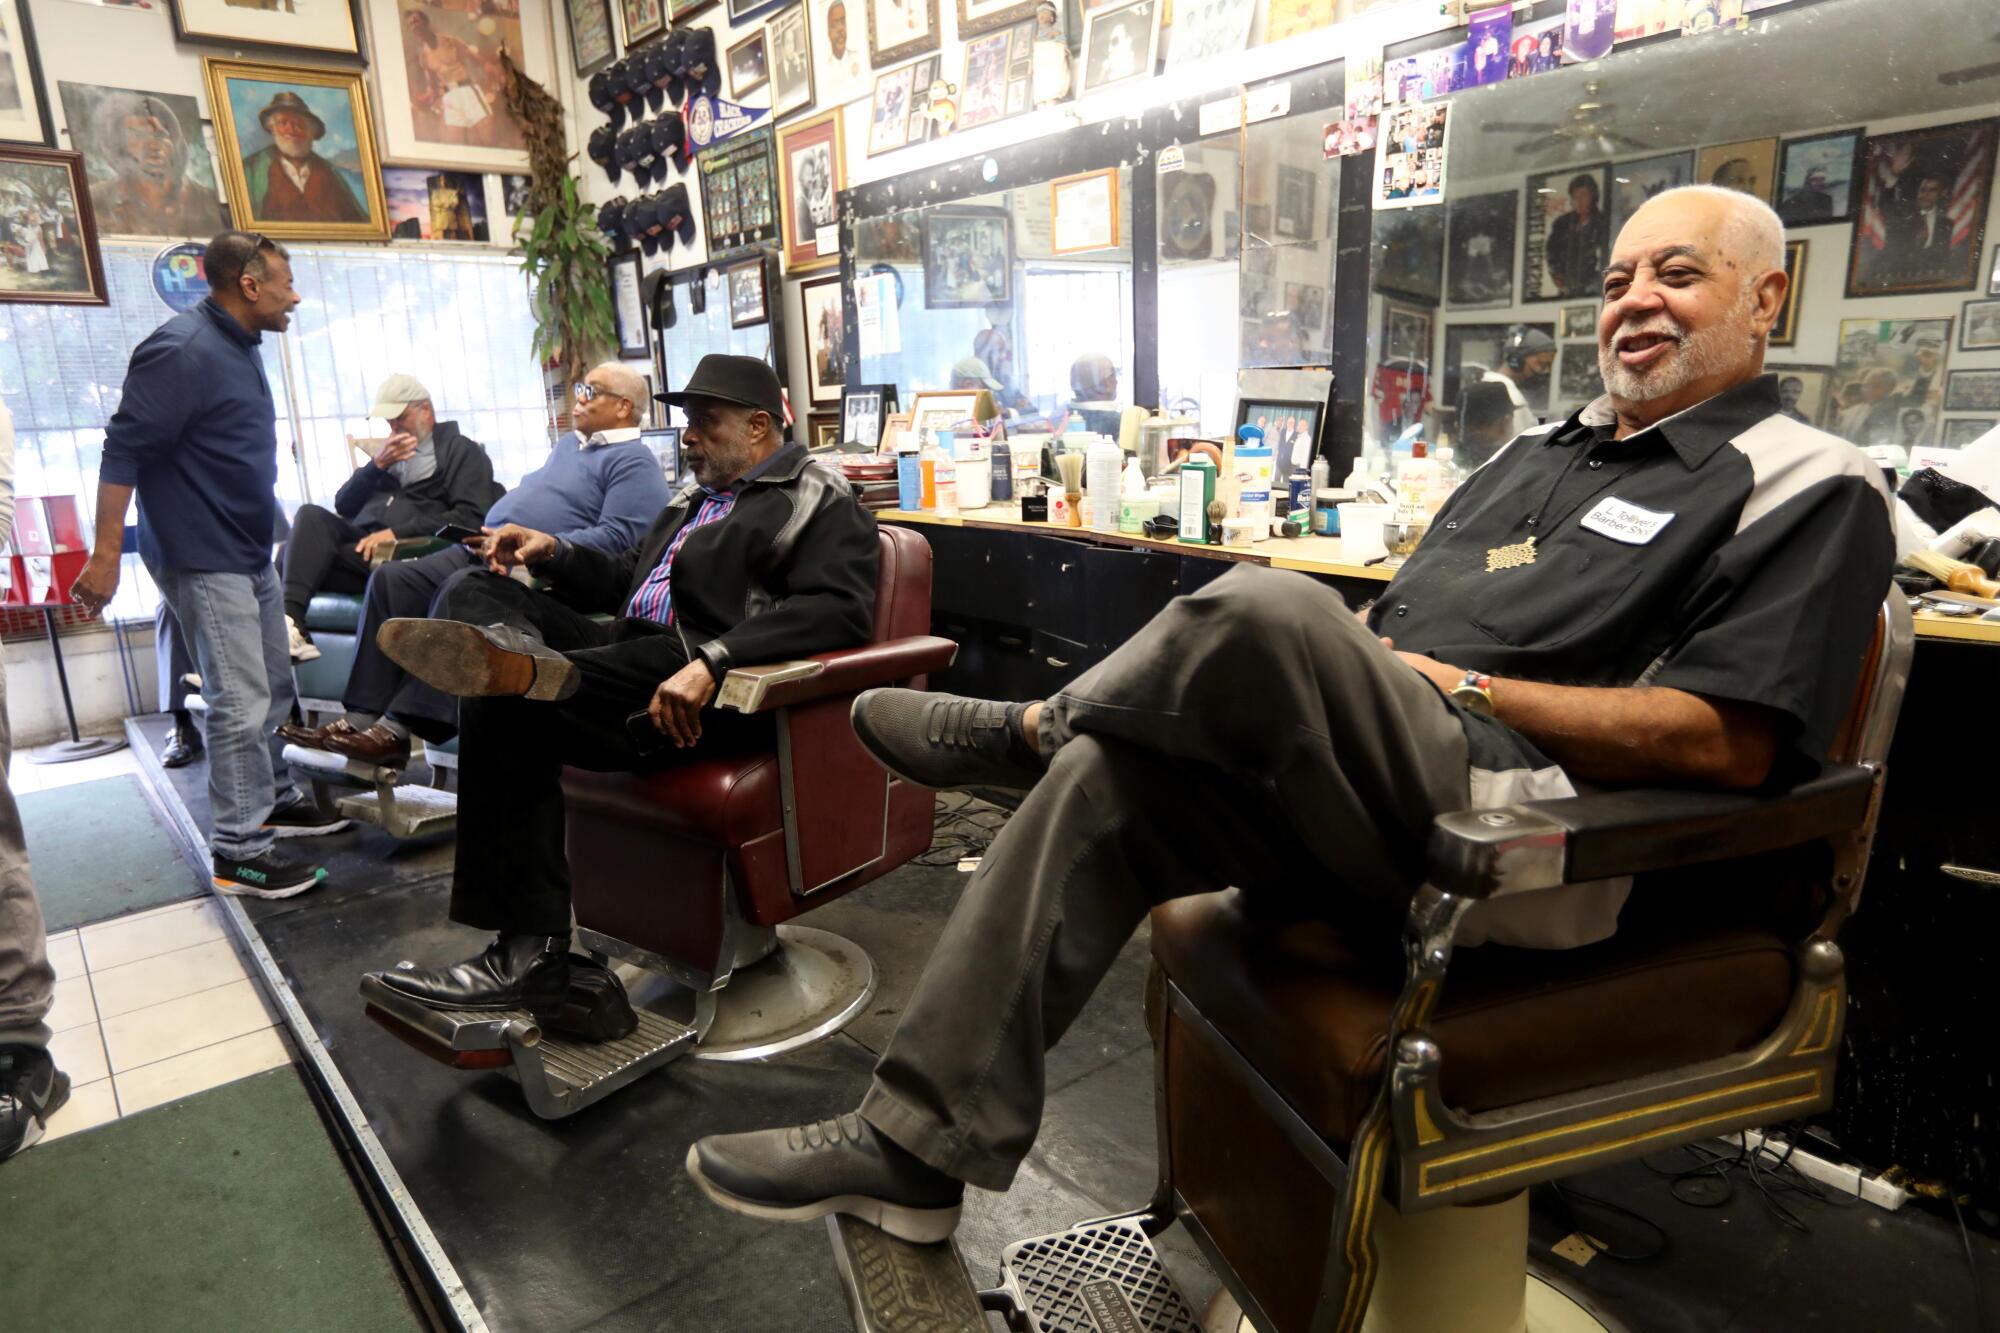 Lawrence Tolliver waits for customers while others chat about the topics of the day at Tolliver's Barbershop.